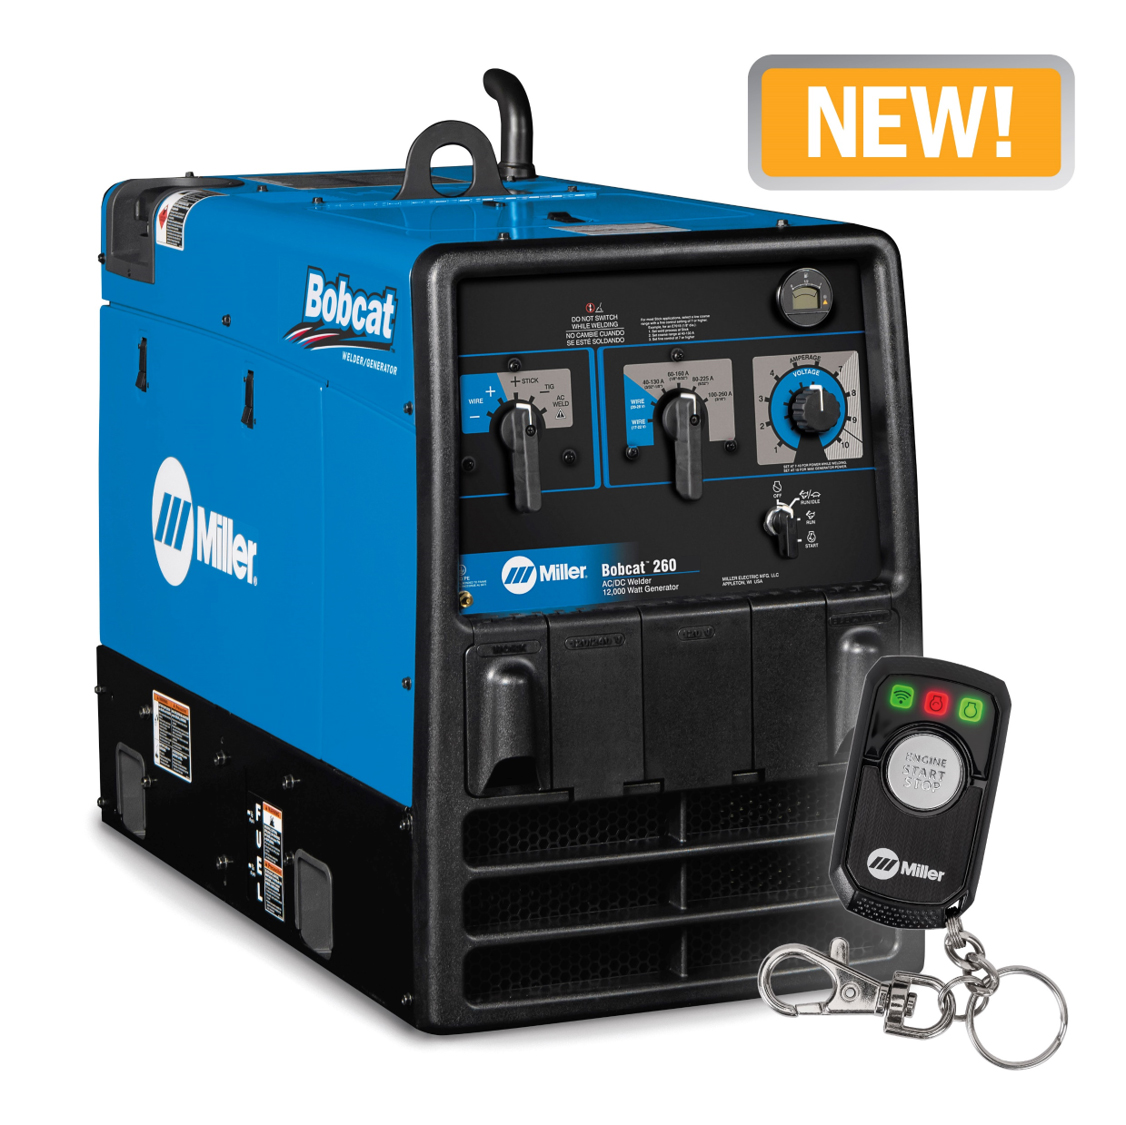 Bobcat™ 260 with Remote Start/Stop, GFCI